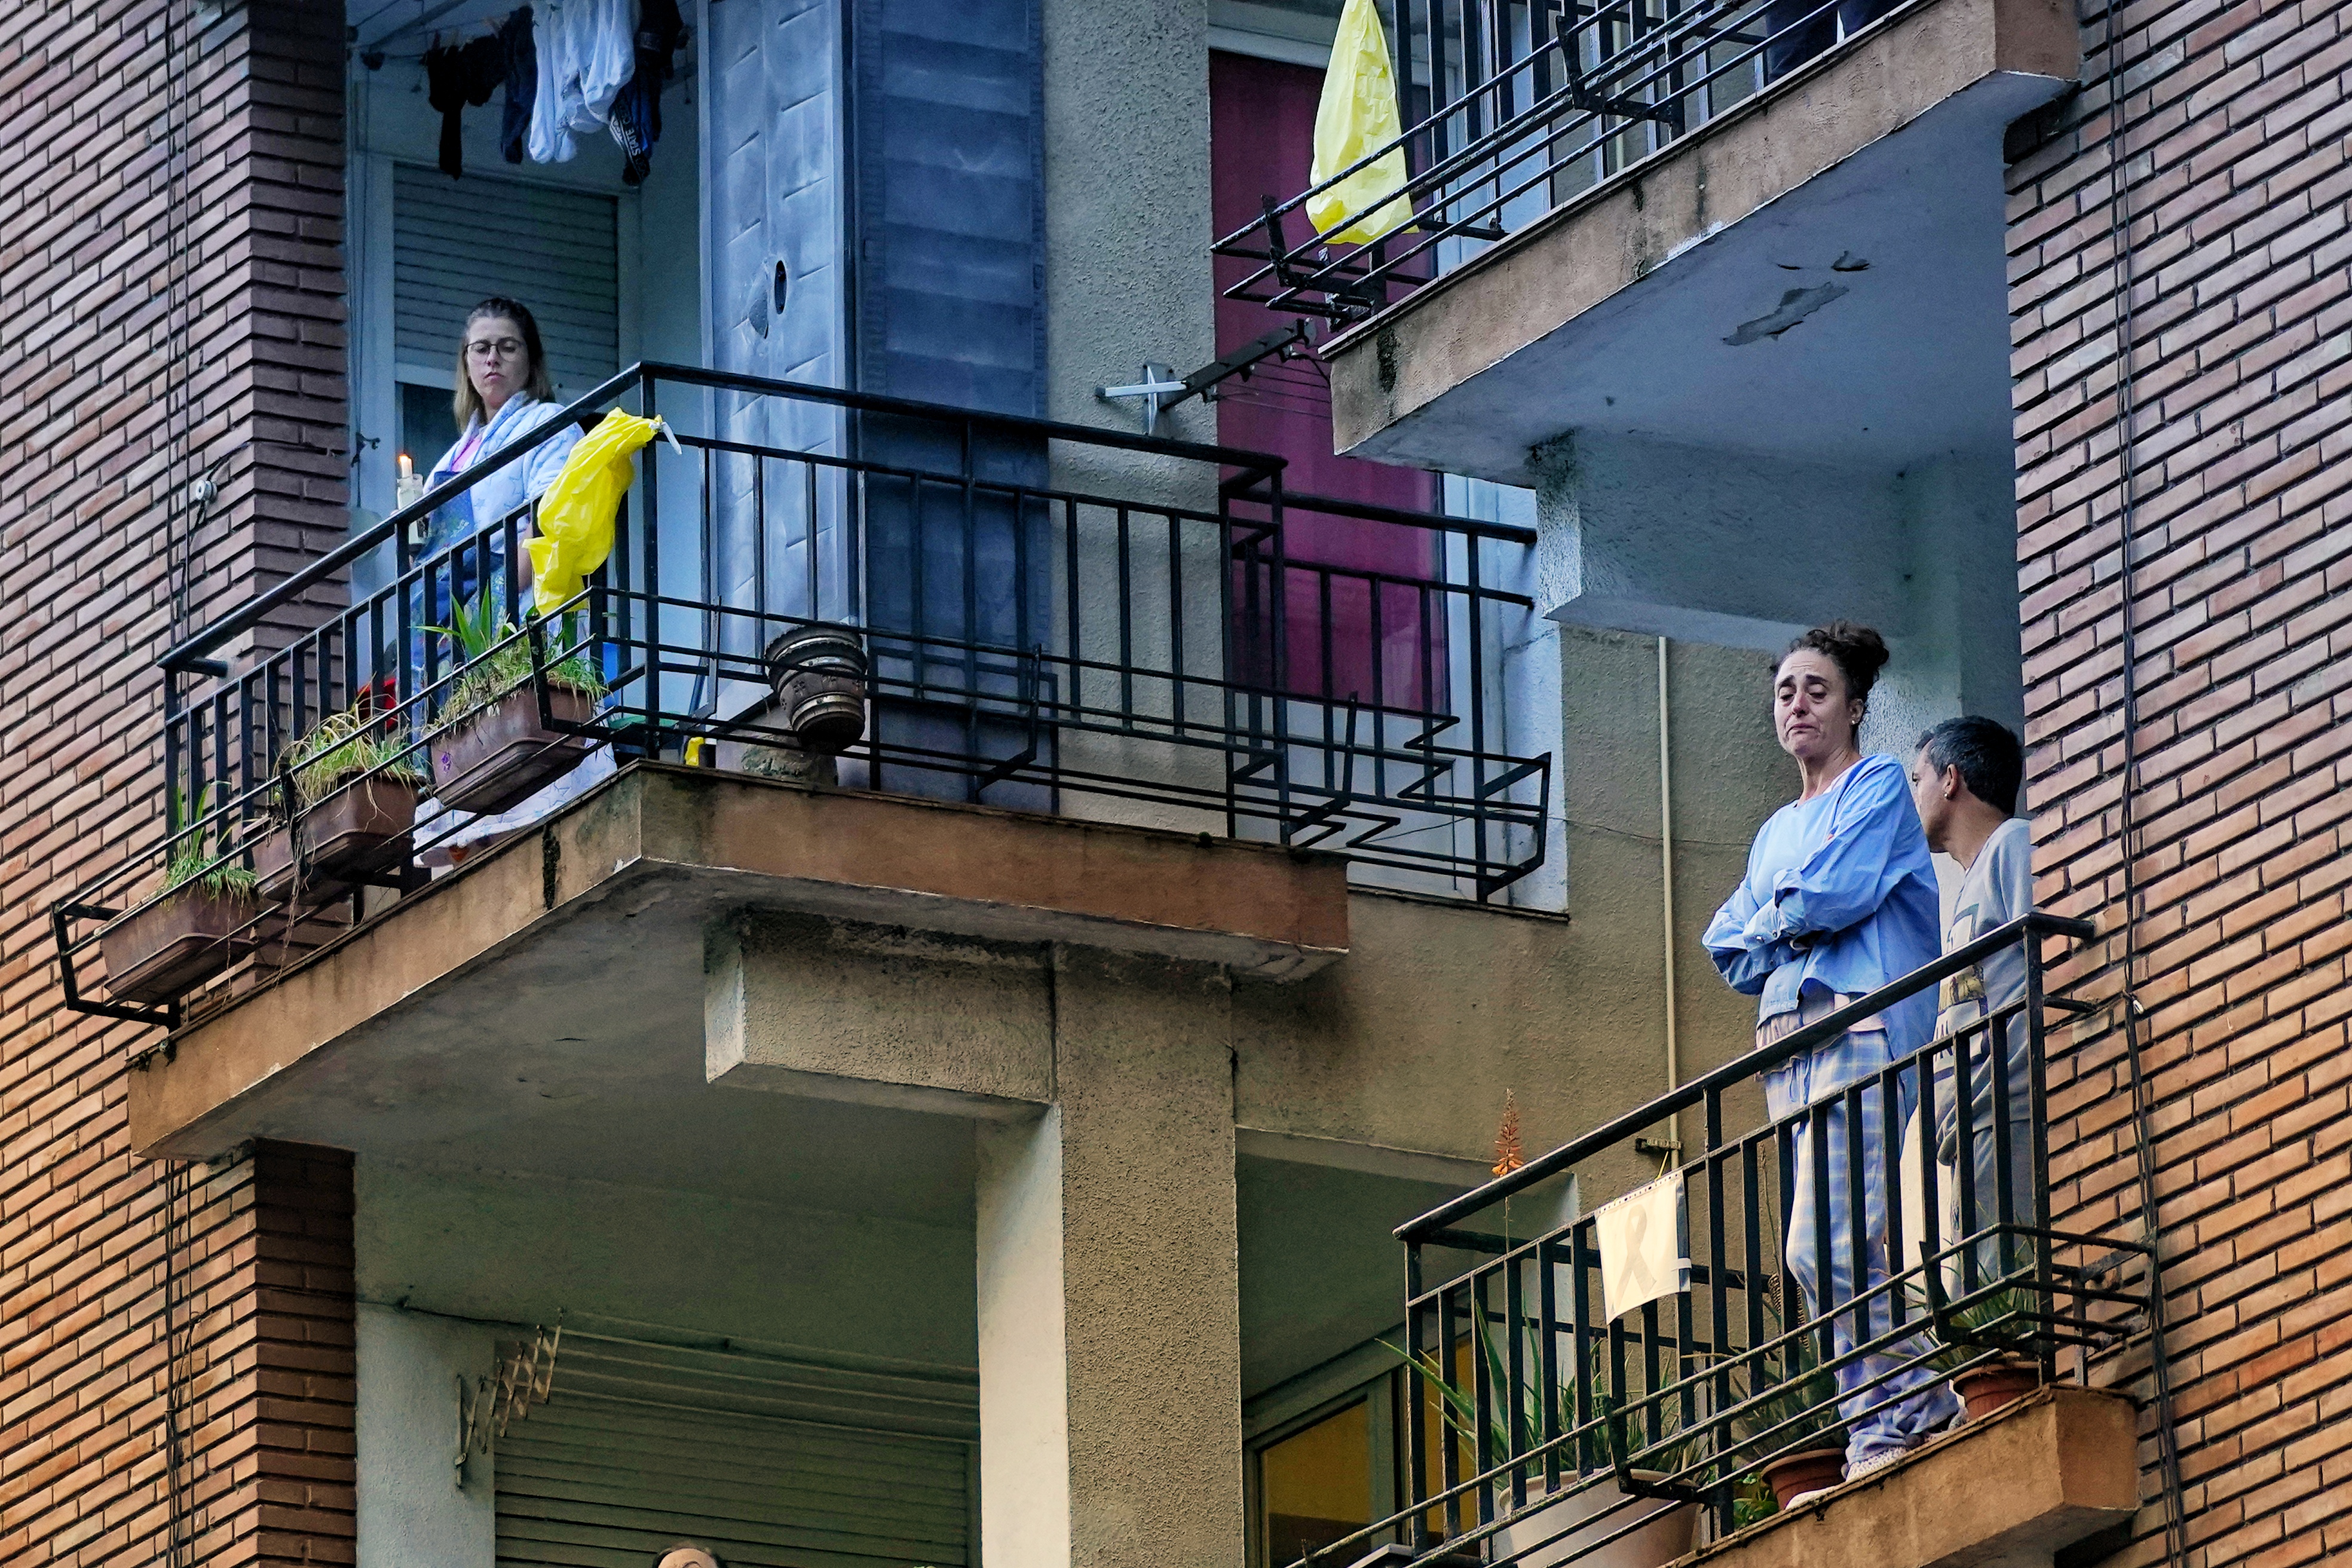 Neighbors on their windows and balconies watching the hologram